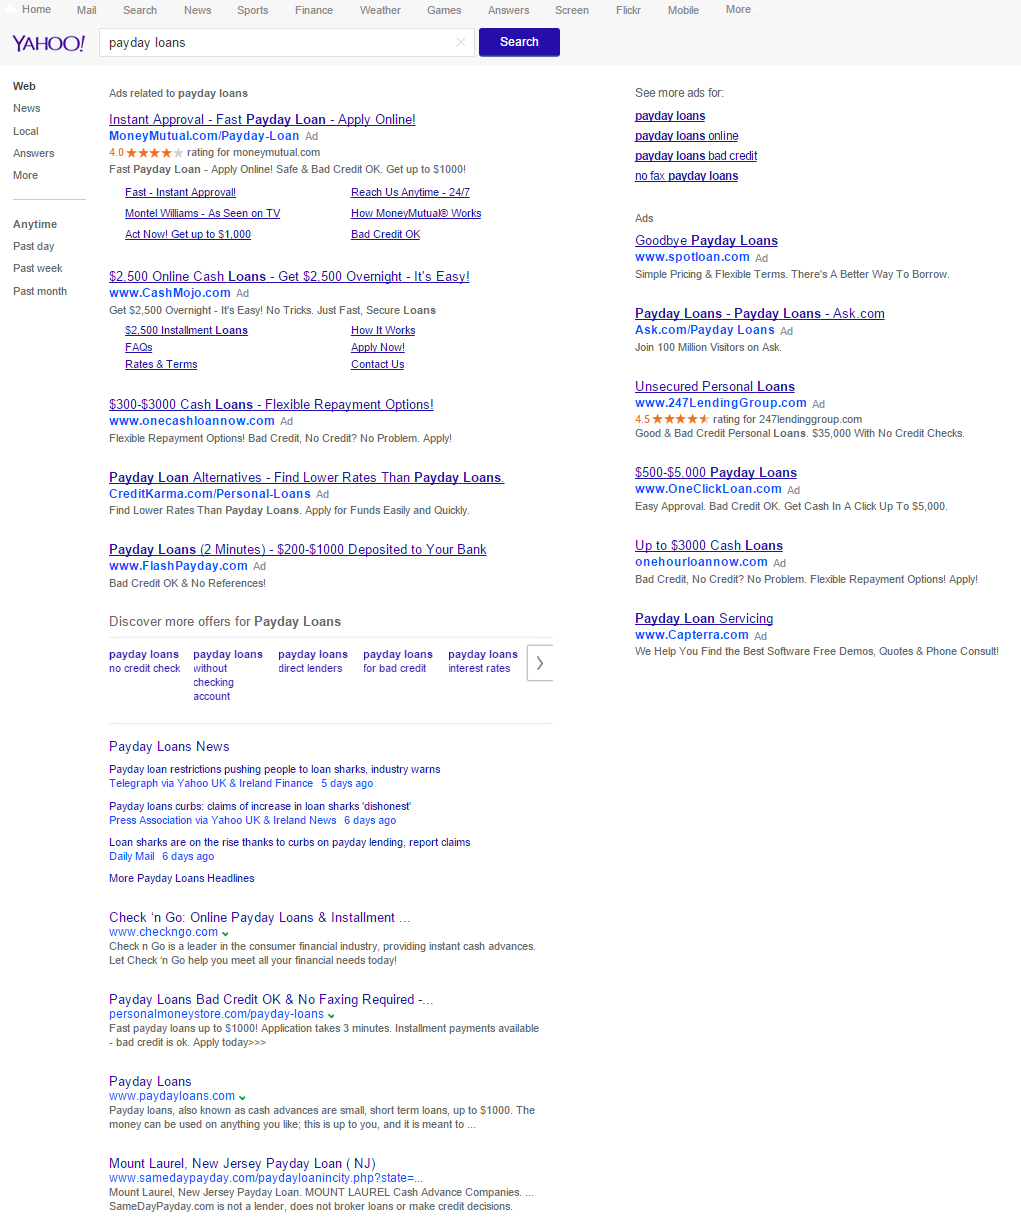 Yahoo Testing Purple Title Links for Ads & Organic Search Results